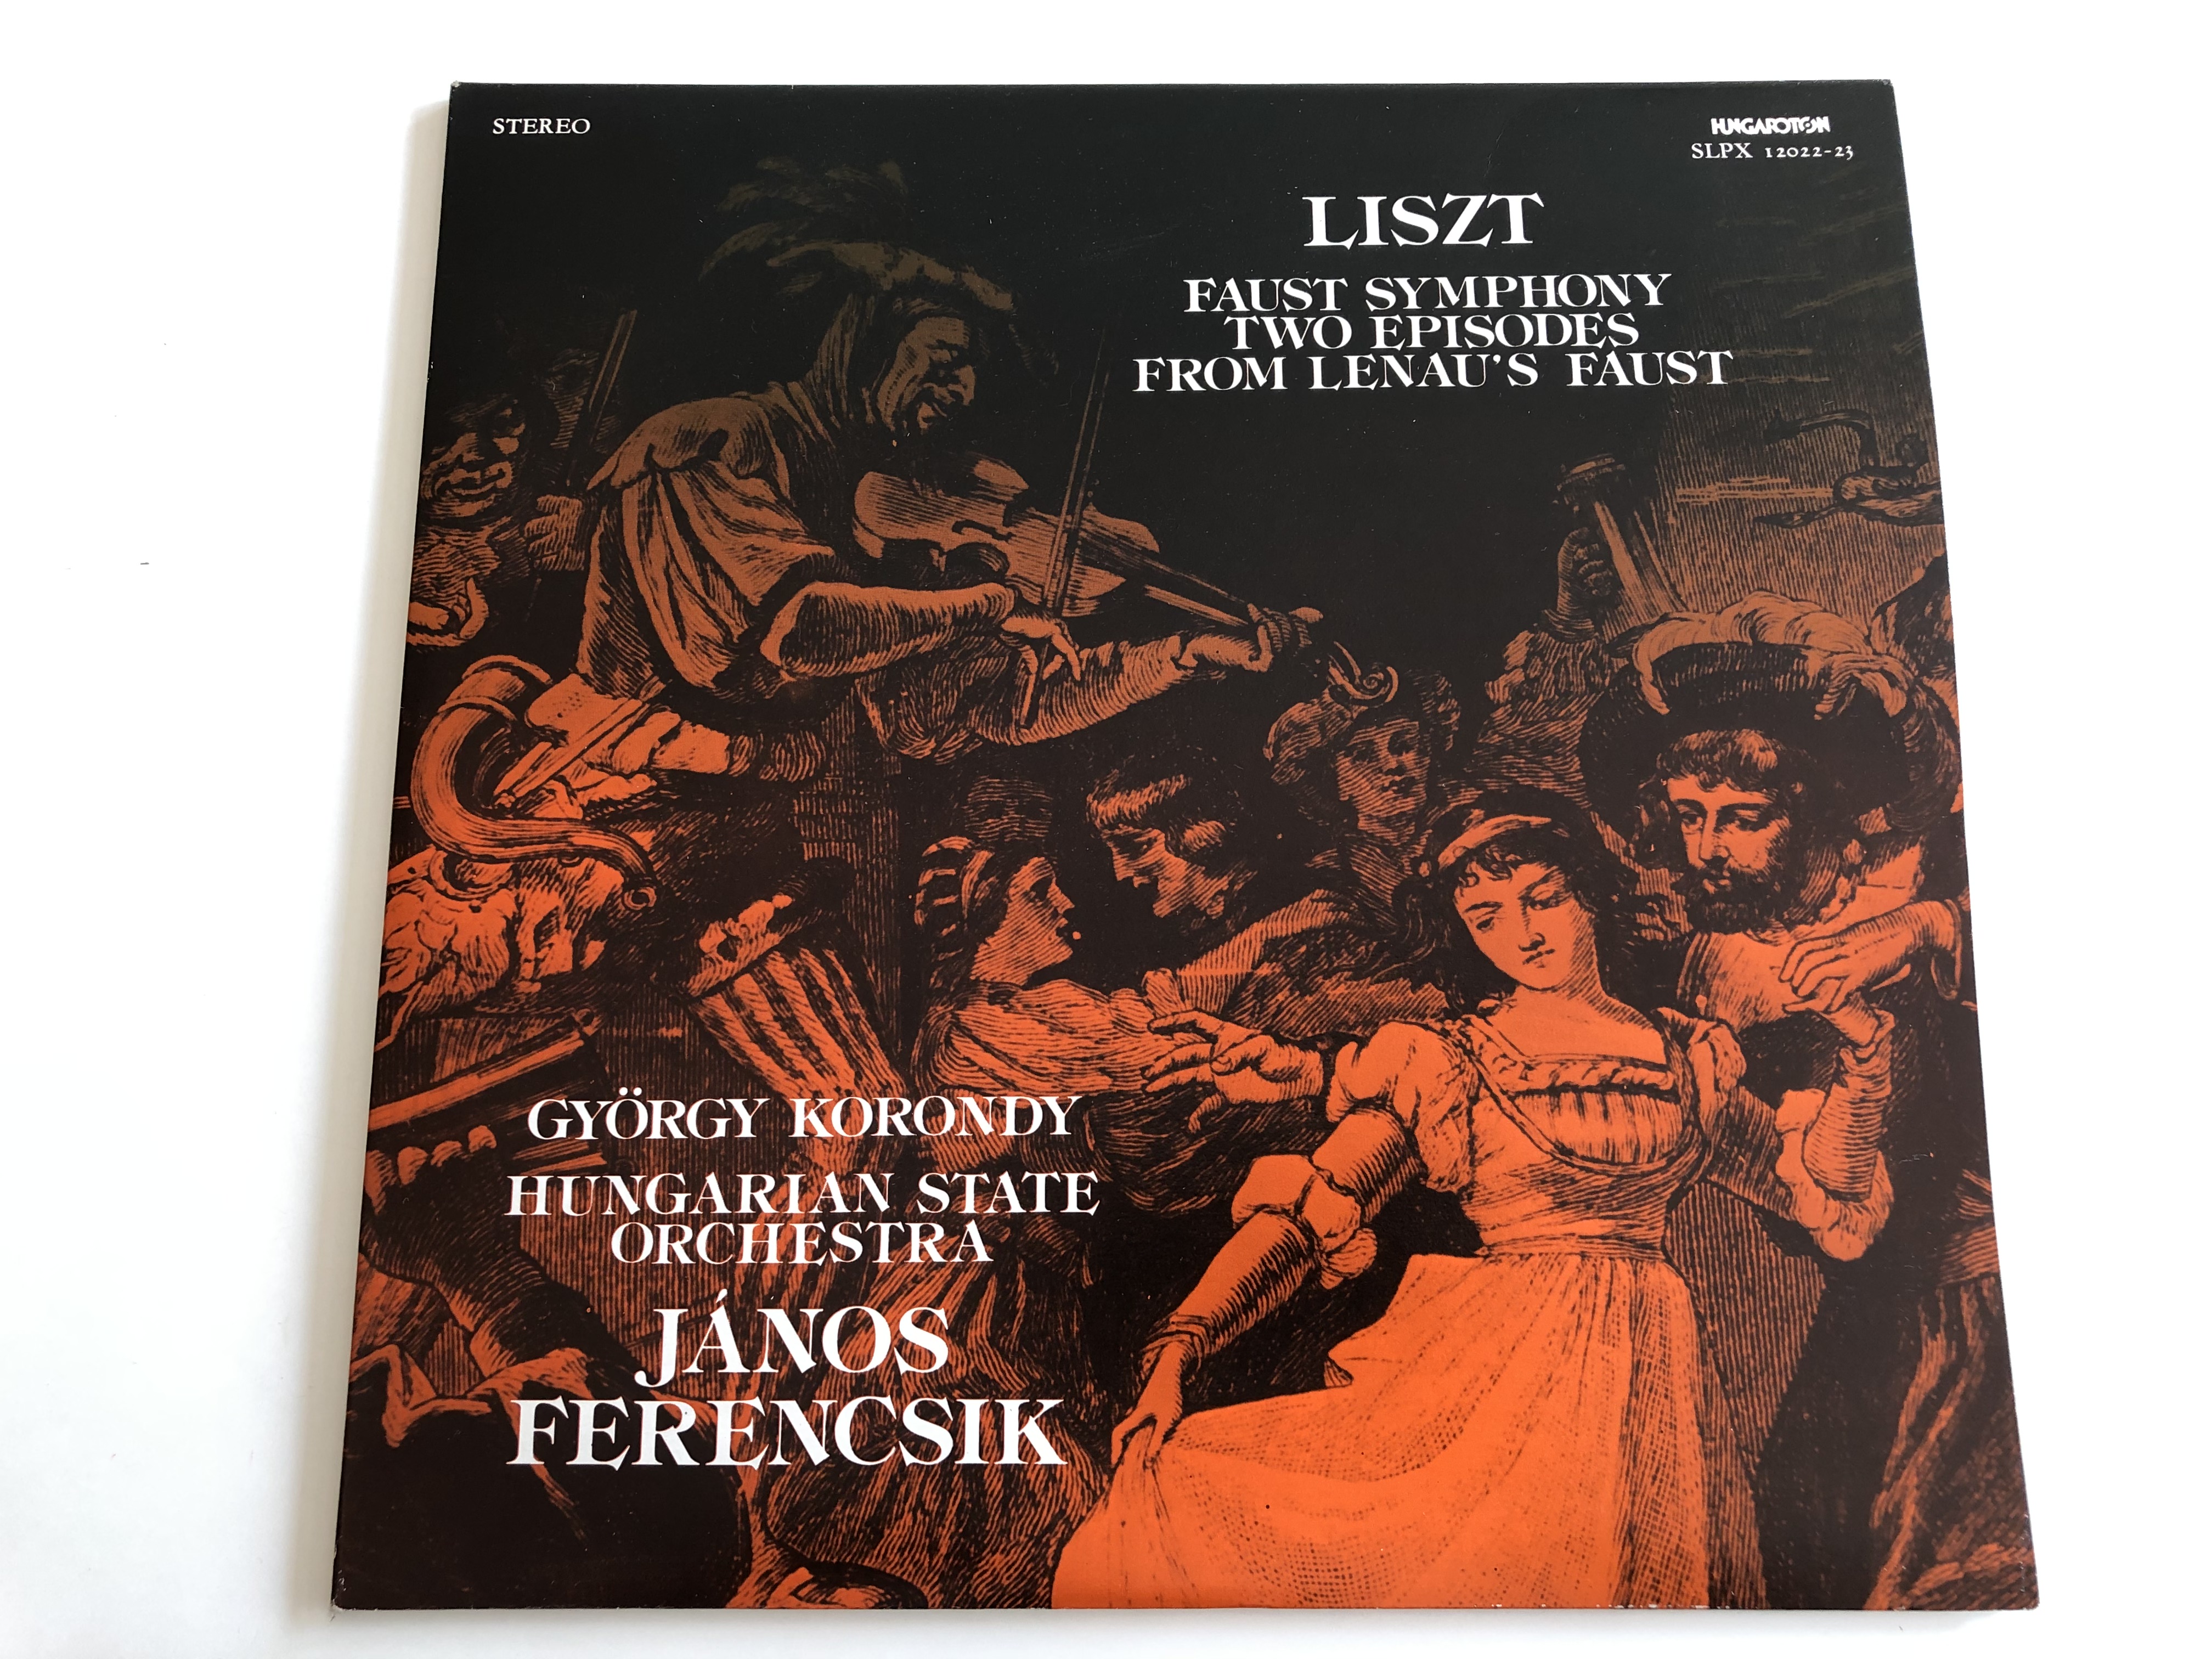 liszt-faust-symphony-two-episodes-from-lenau-s-faust-gy-rgy-korondy-hungarian-state-orchestra-conducted-j-nos-ferencsik-hungaroton-2x-lp-stereo-slpx-12022-23-1-.jpg